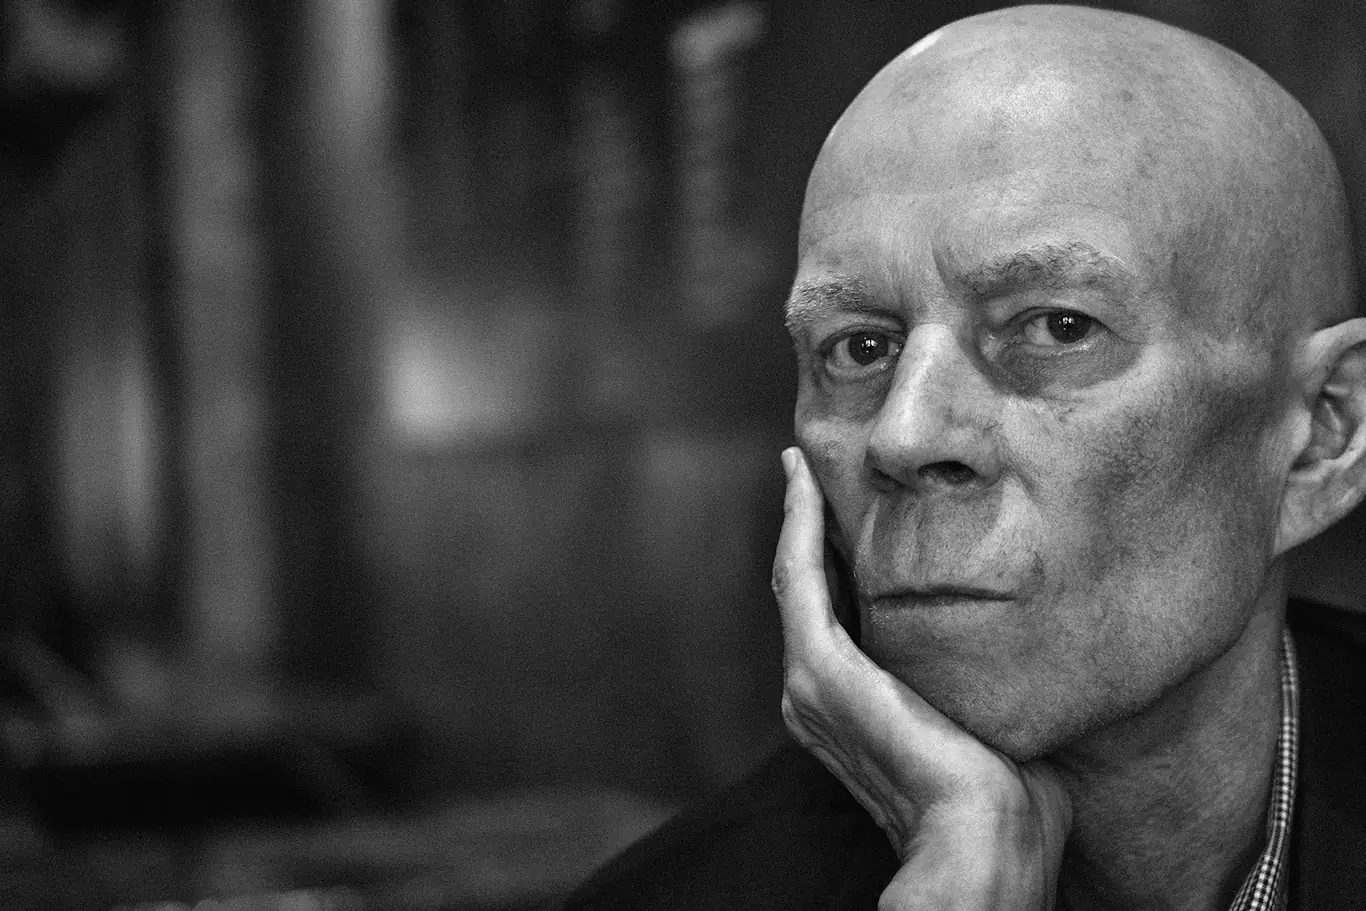 VINCE CLARKE shares ‘White Rabbit’ – the latest track to be released from his forthcoming debut solo album ‘Songs of Silence’